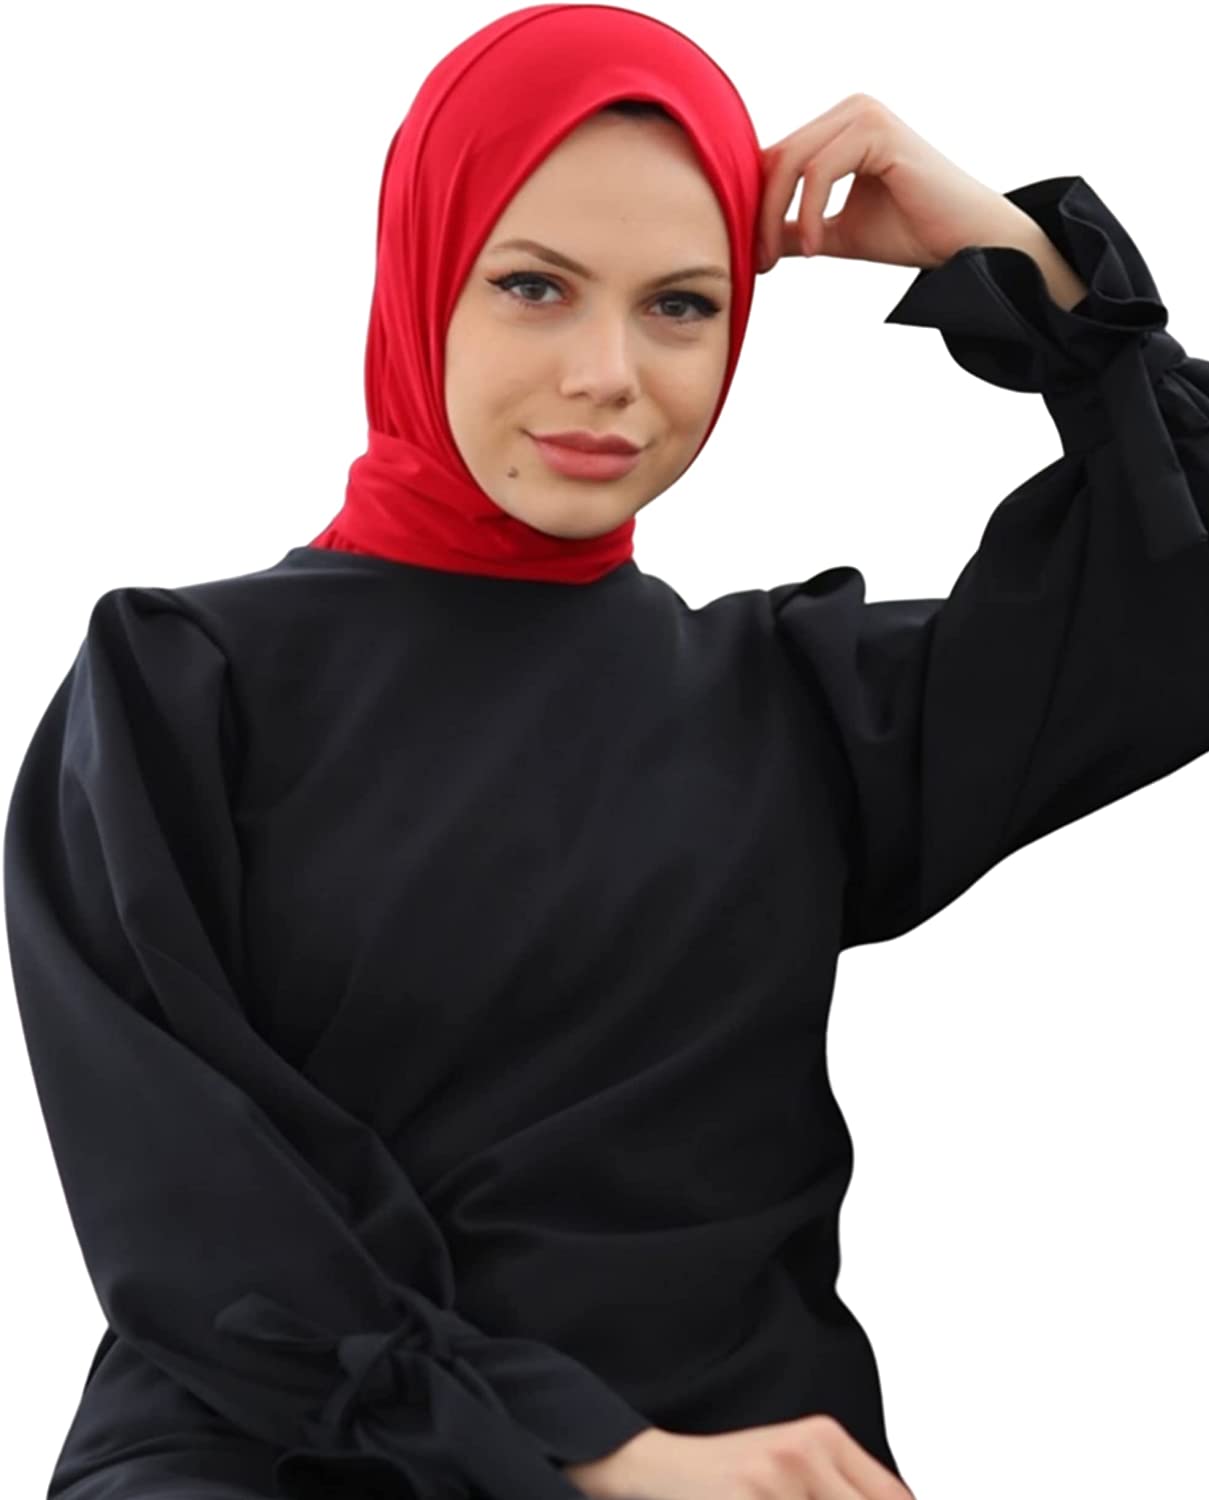 Marwa Fashion Muslim Hijab for Women - Premium Quality Hijab Scarves for Women made up of 100% Stretchable Polyester - Sweat Absorbent and can be Used on Every Occasion